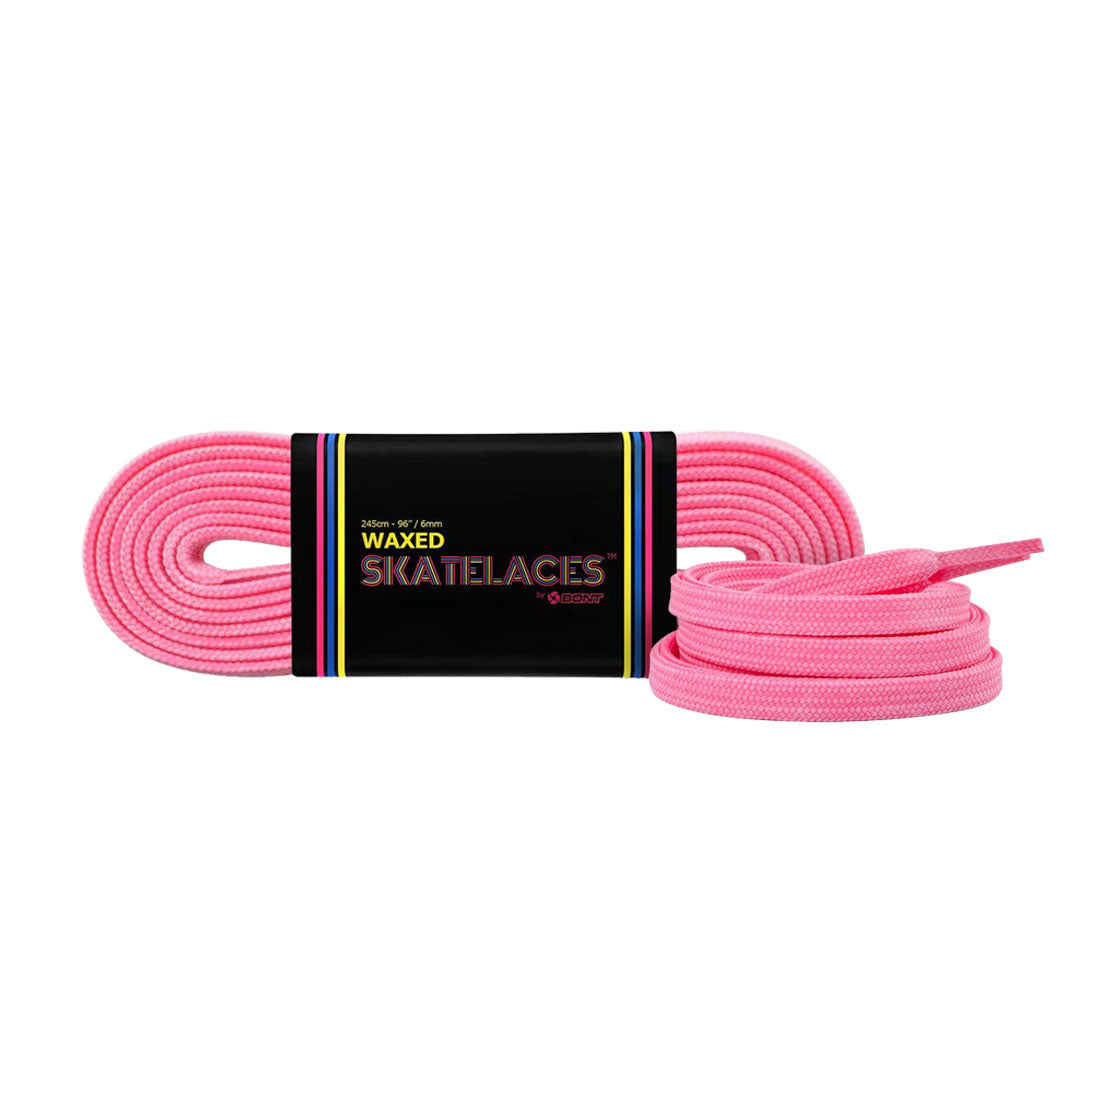 Bont Waxed 8mm Laces - 120cm/47in Cosmo Pink Laces